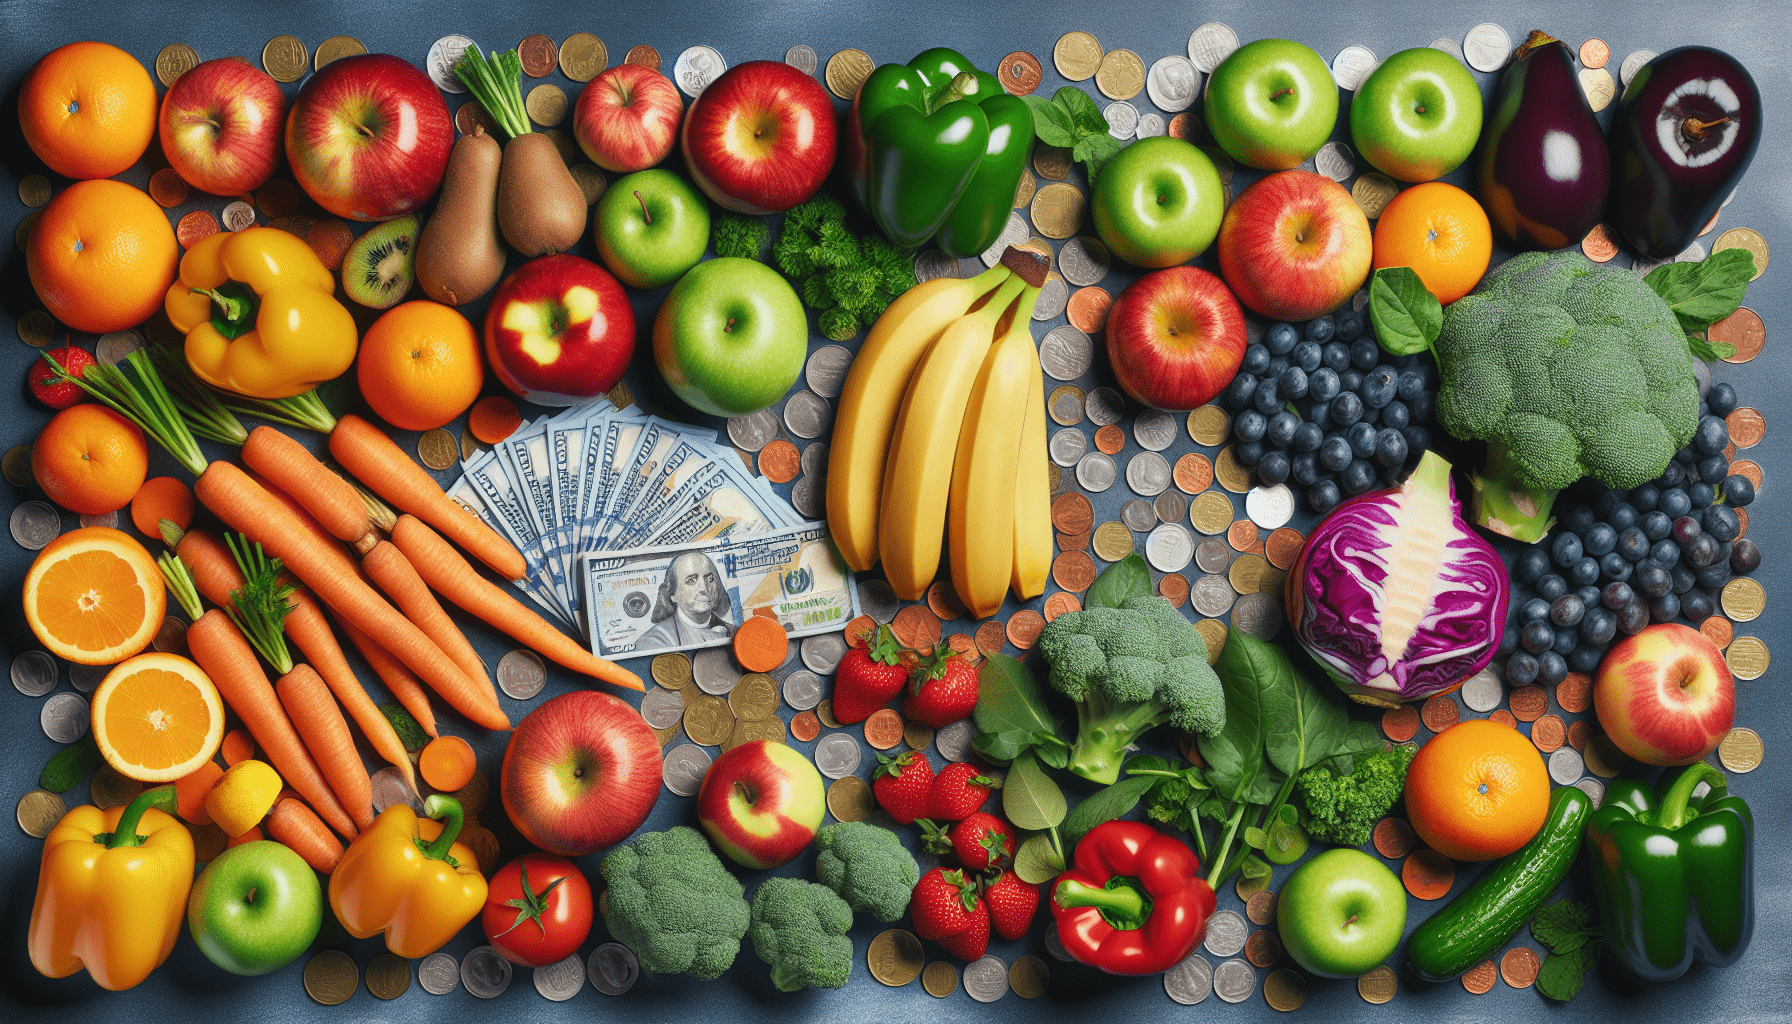 Healthy Eating On A Budget: Weight Loss Without Breaking The Bank